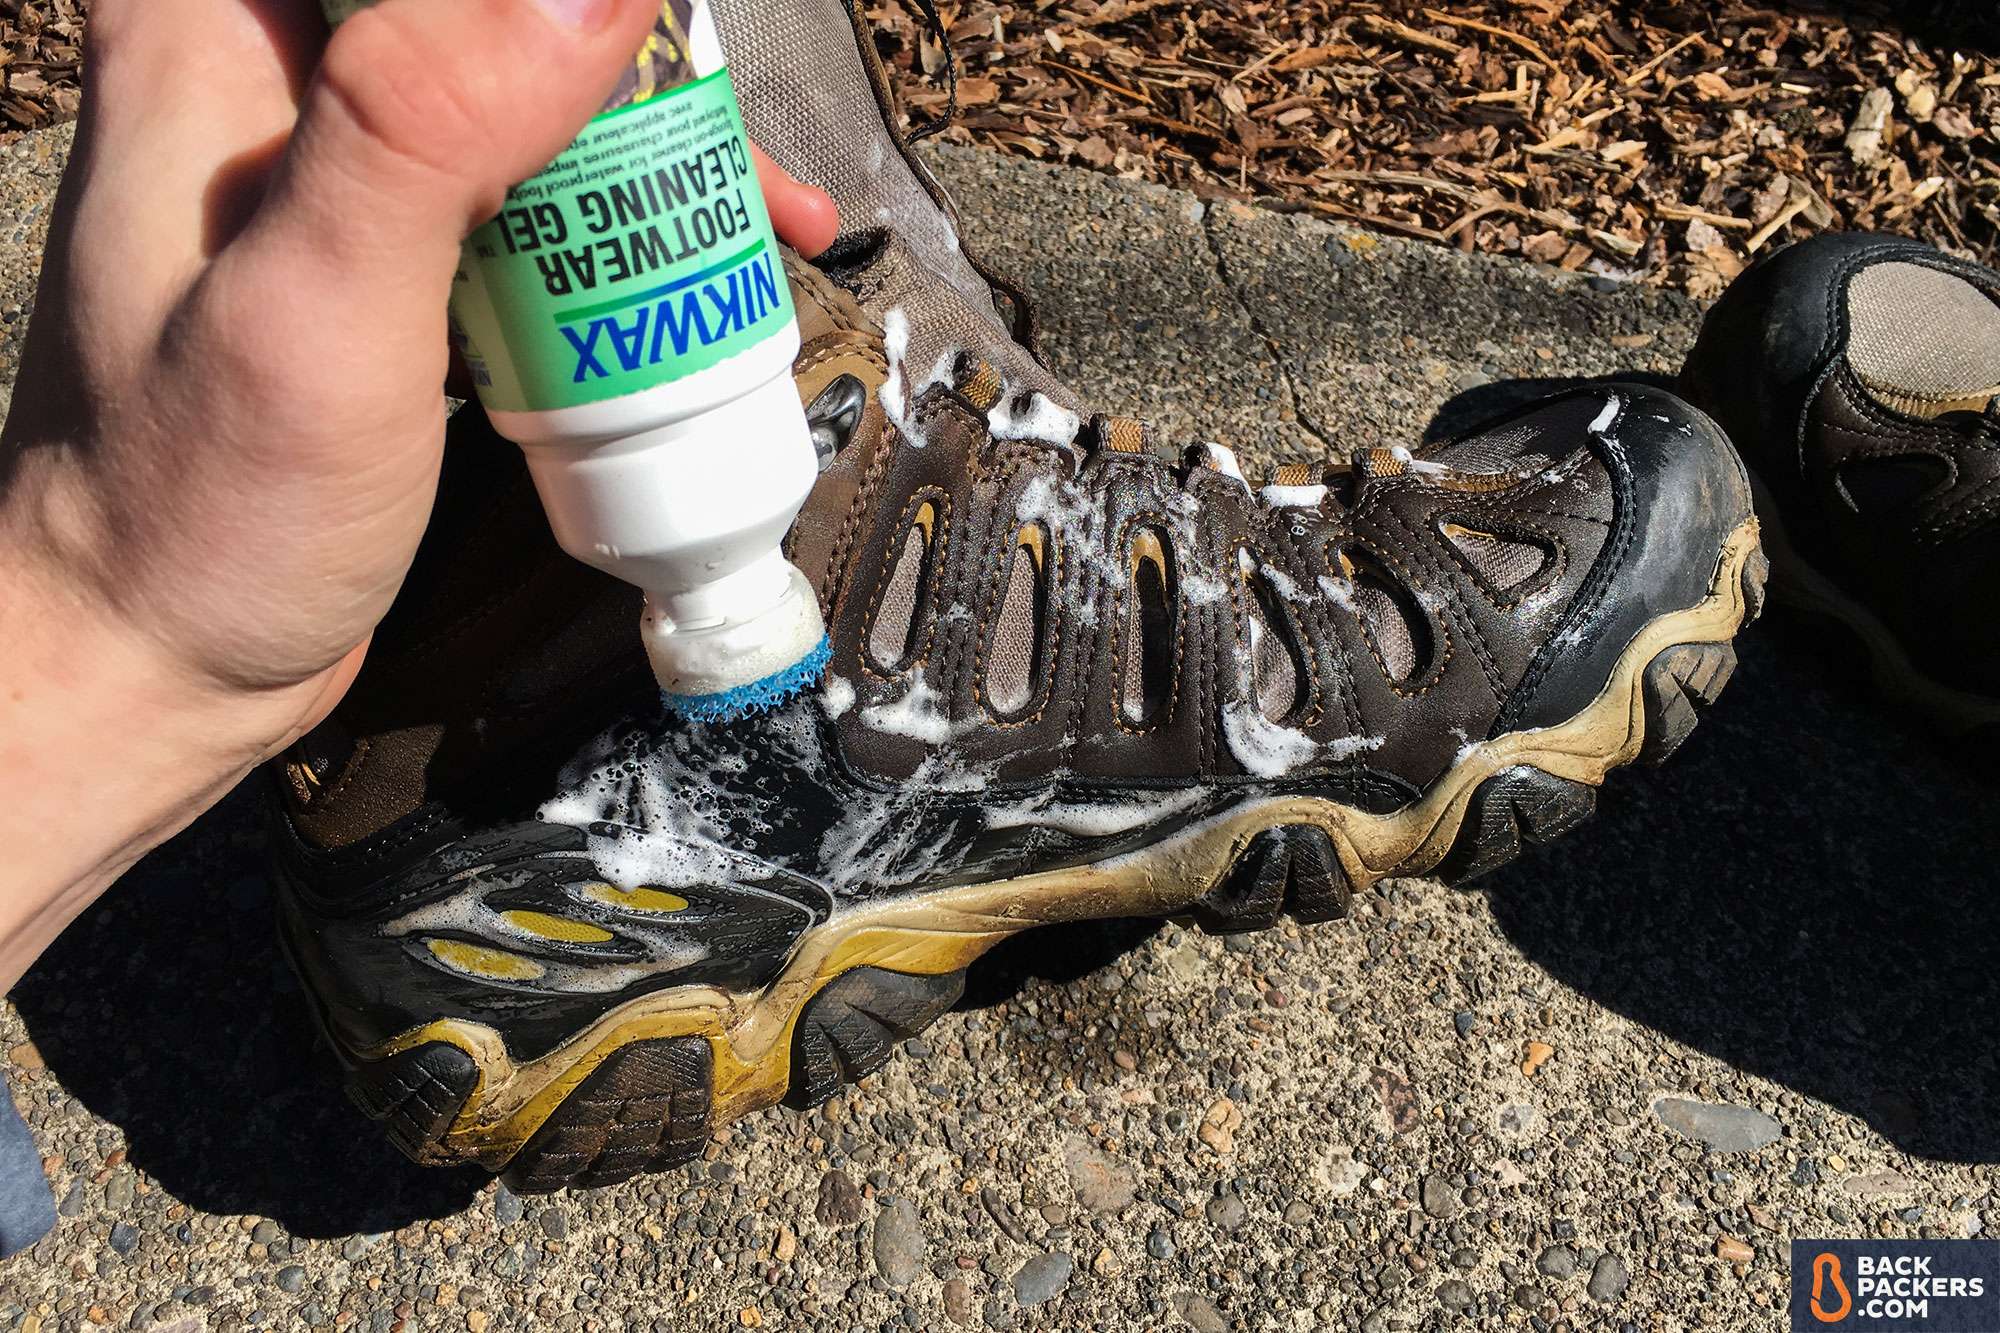 waterproofing spray for hiking boots